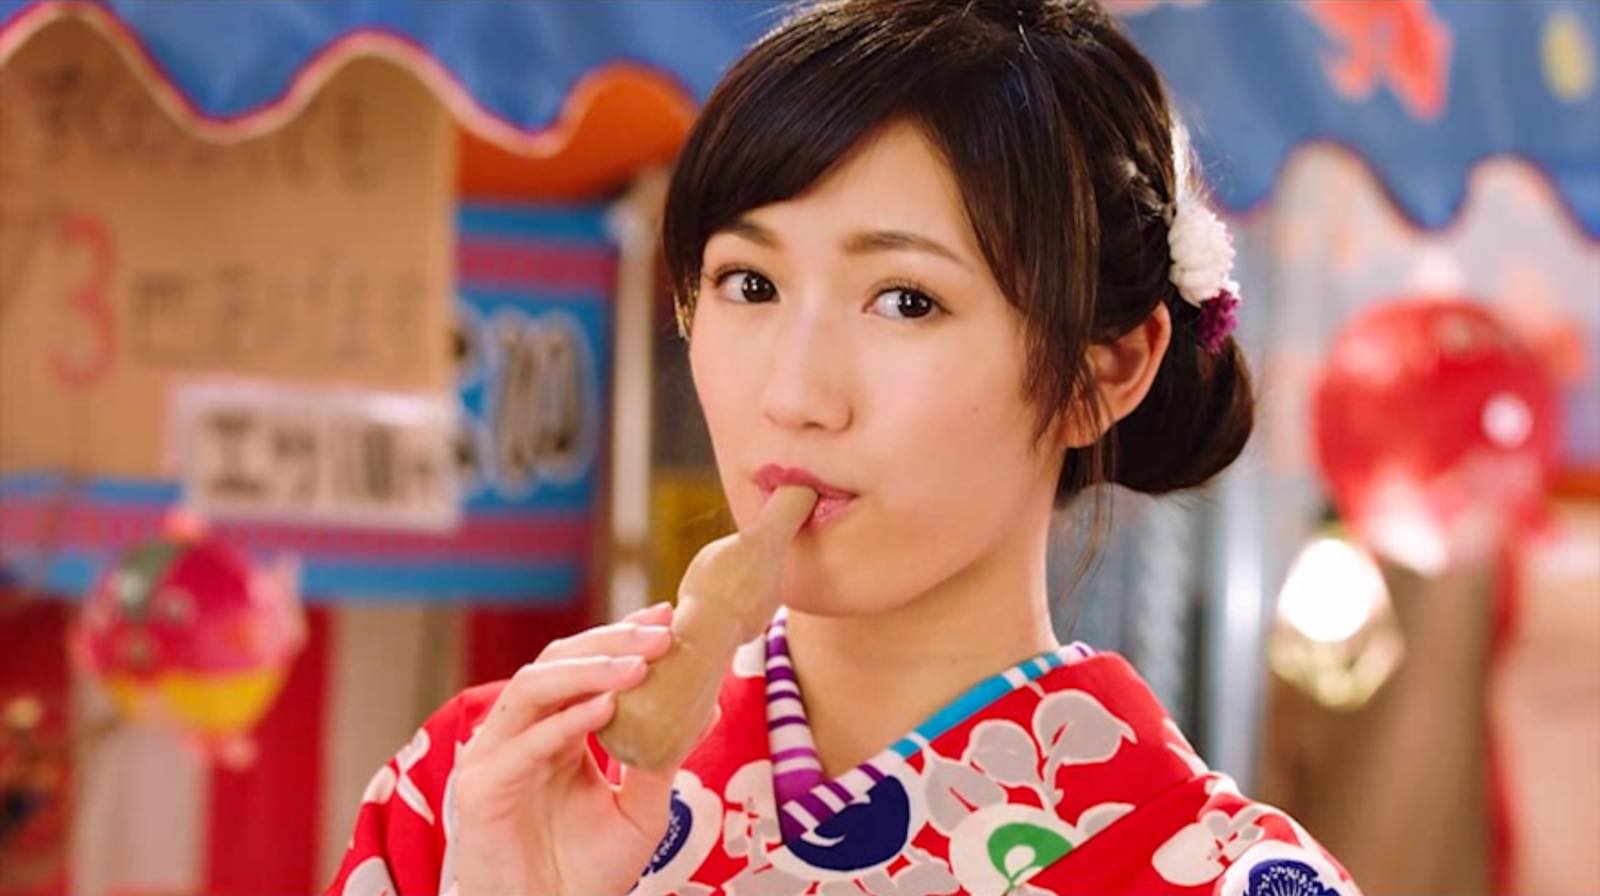 Pa-Pi-Pu-Pe-Po! AKB48 Introduce a Word Game in the New Commercial for Papico!